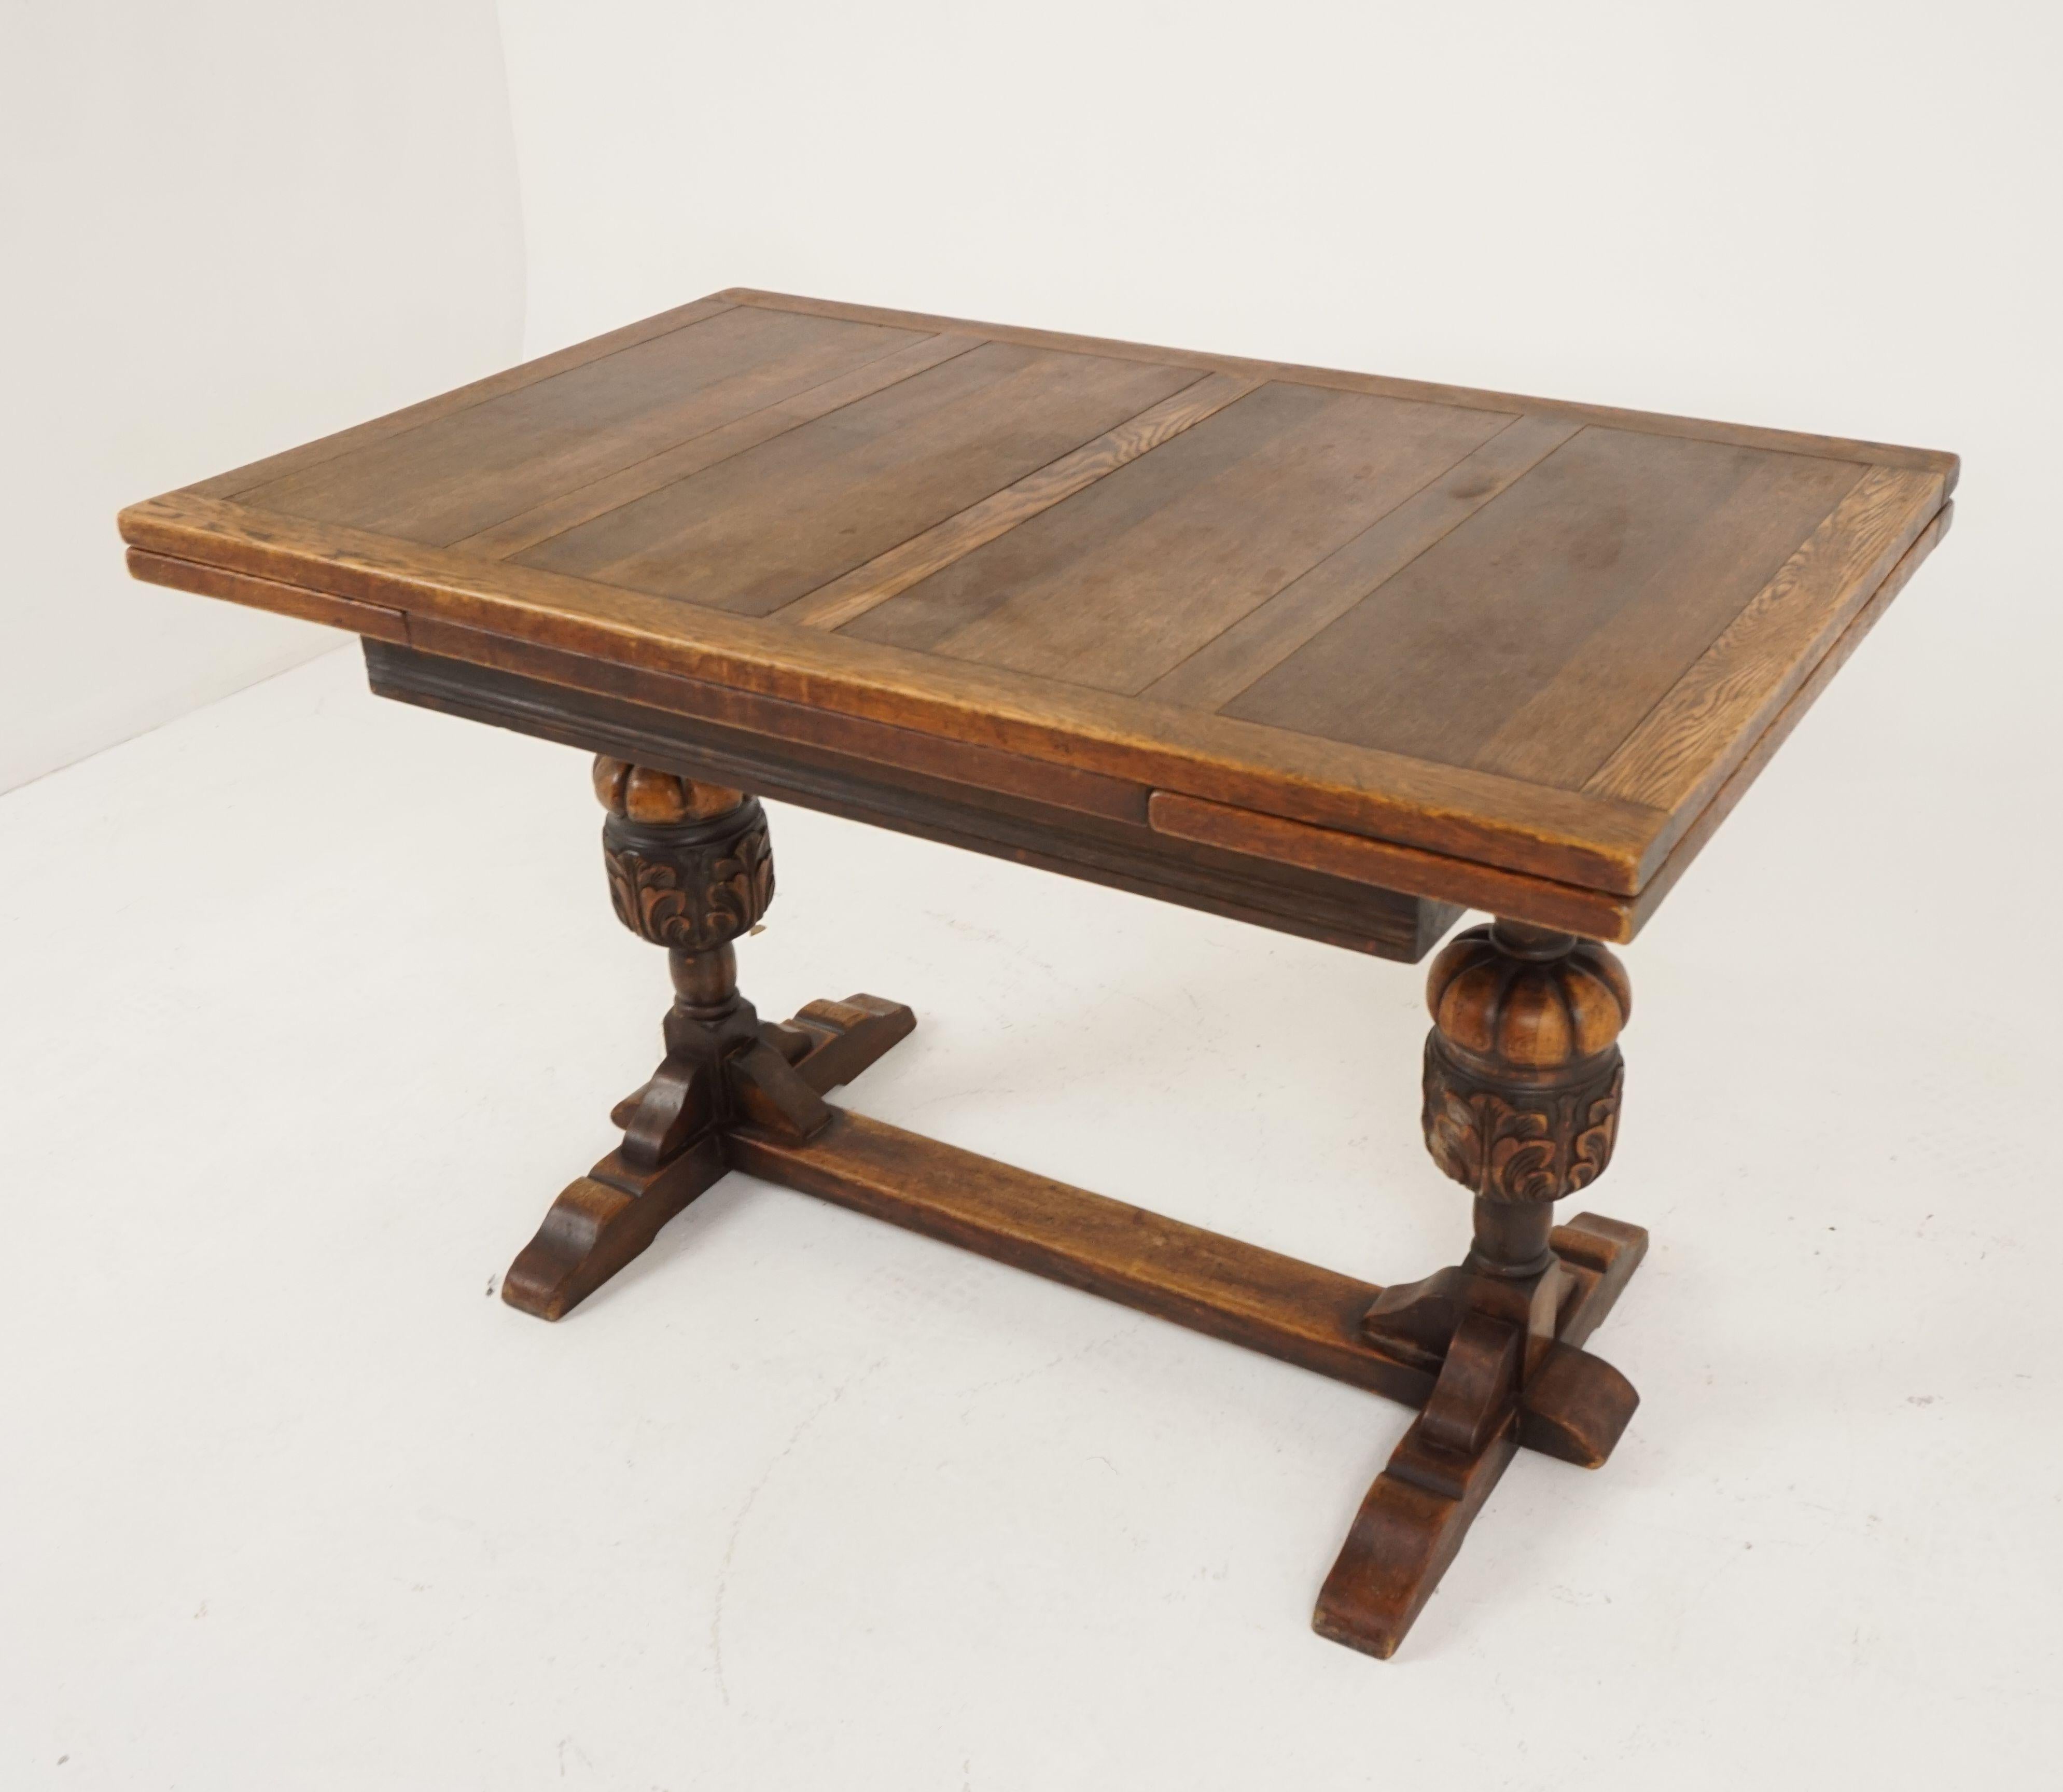 Vintage oak refectory table, draw leaf, writing table, Scotland, 1930

Scotland, 1930
Solid oak and veneers
Original finish
Rectangular top with four oak veneered panels
Solid oak frame
Pair of hidden leaves underneath
These leaves pullout